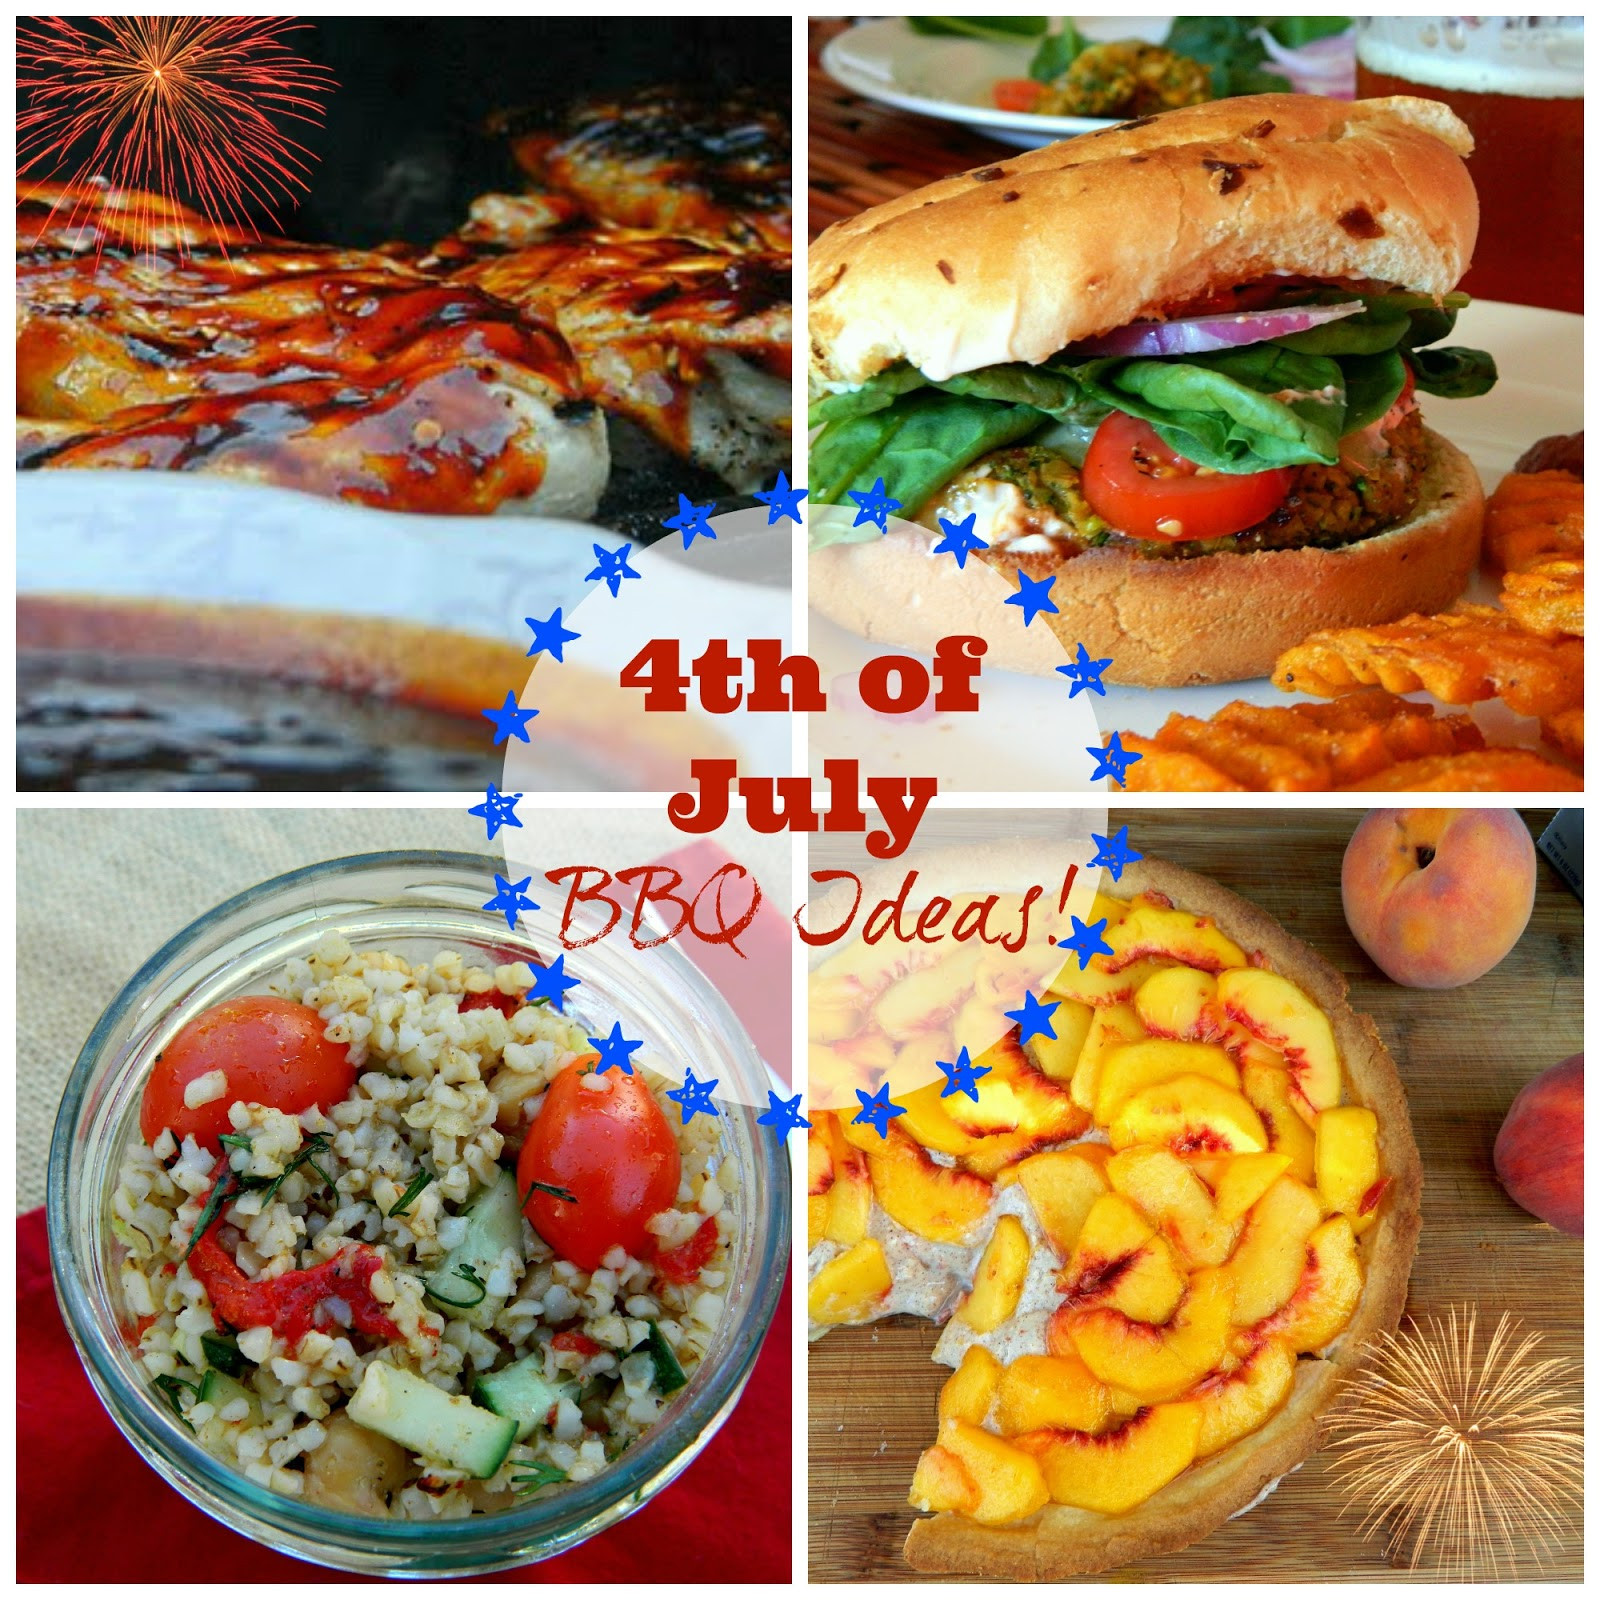 4th Of July Grilling Ideas
 The Cyclist s Wife 4th of July BBQ Ideas